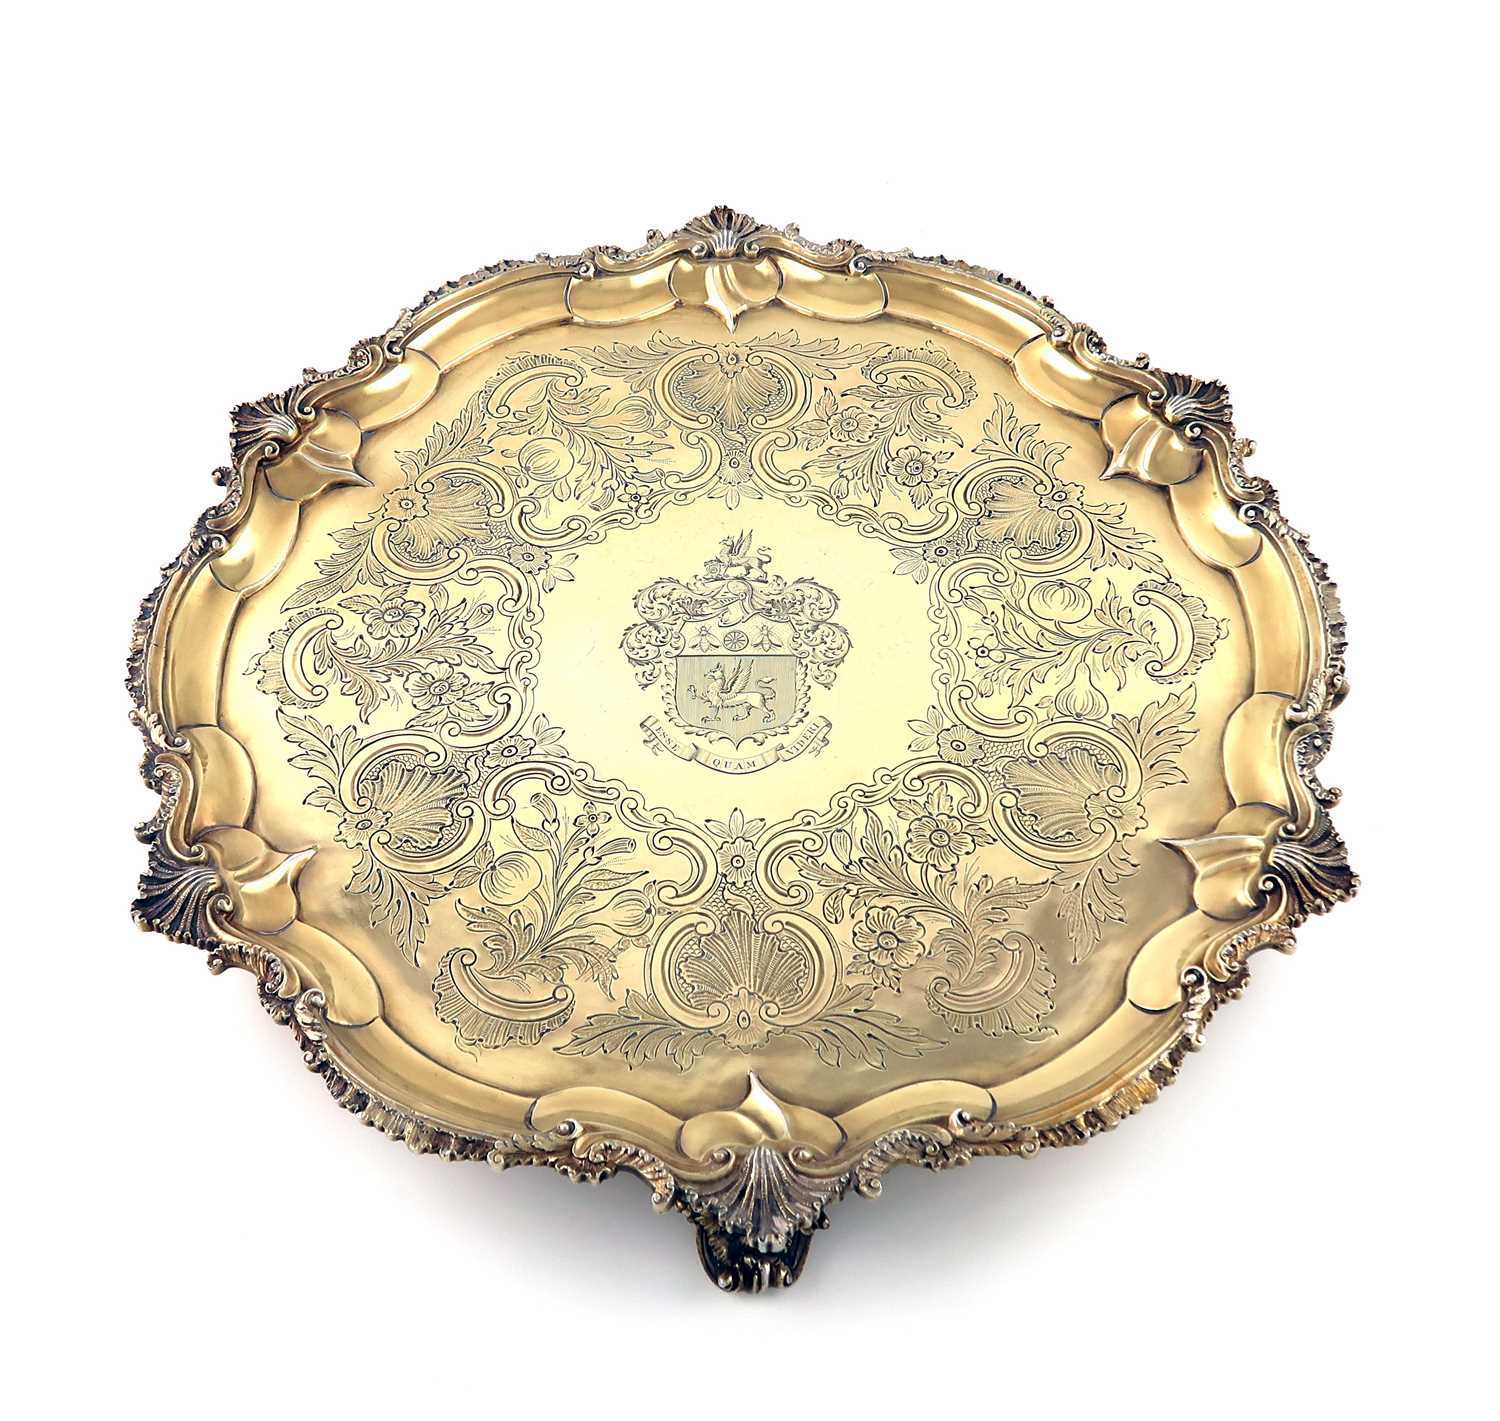 A large George III silver-gilt salver, maker's mark IM, London 1807, circular form, shell and scroll - Image 2 of 2